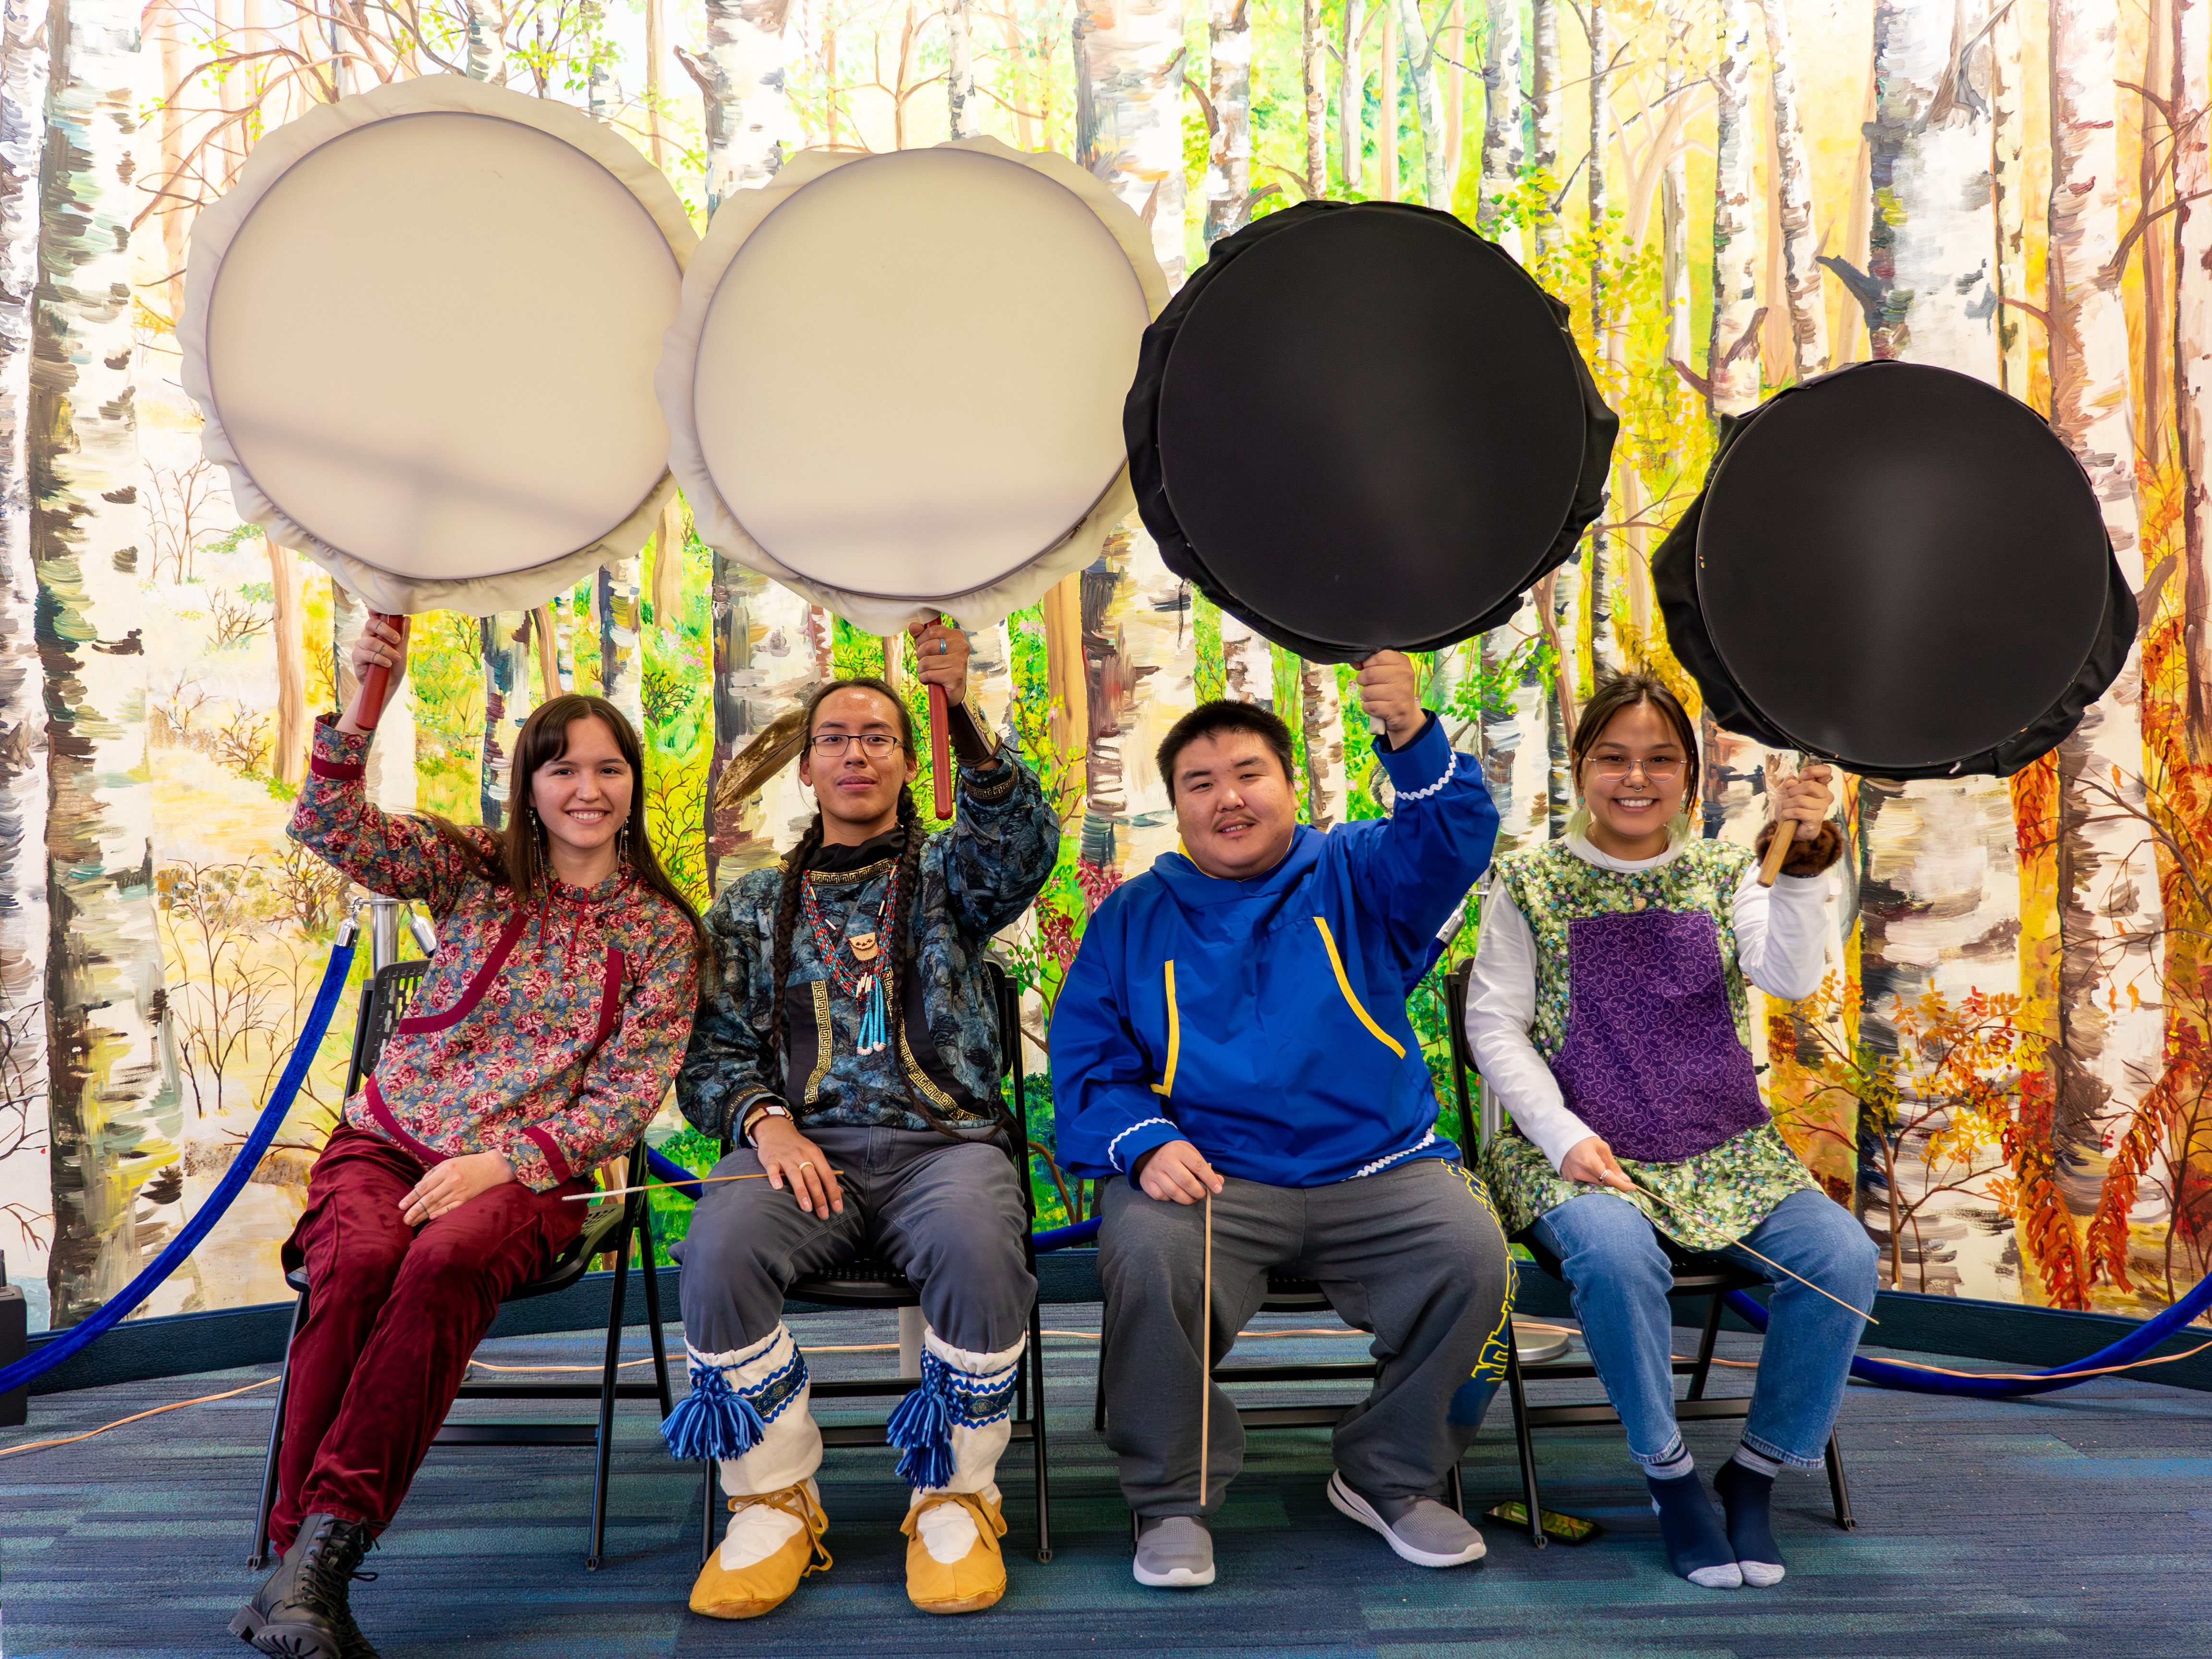 Four people sit on chairs in front of a birch tree mural as they hold up traditional Alaska Native drums.  